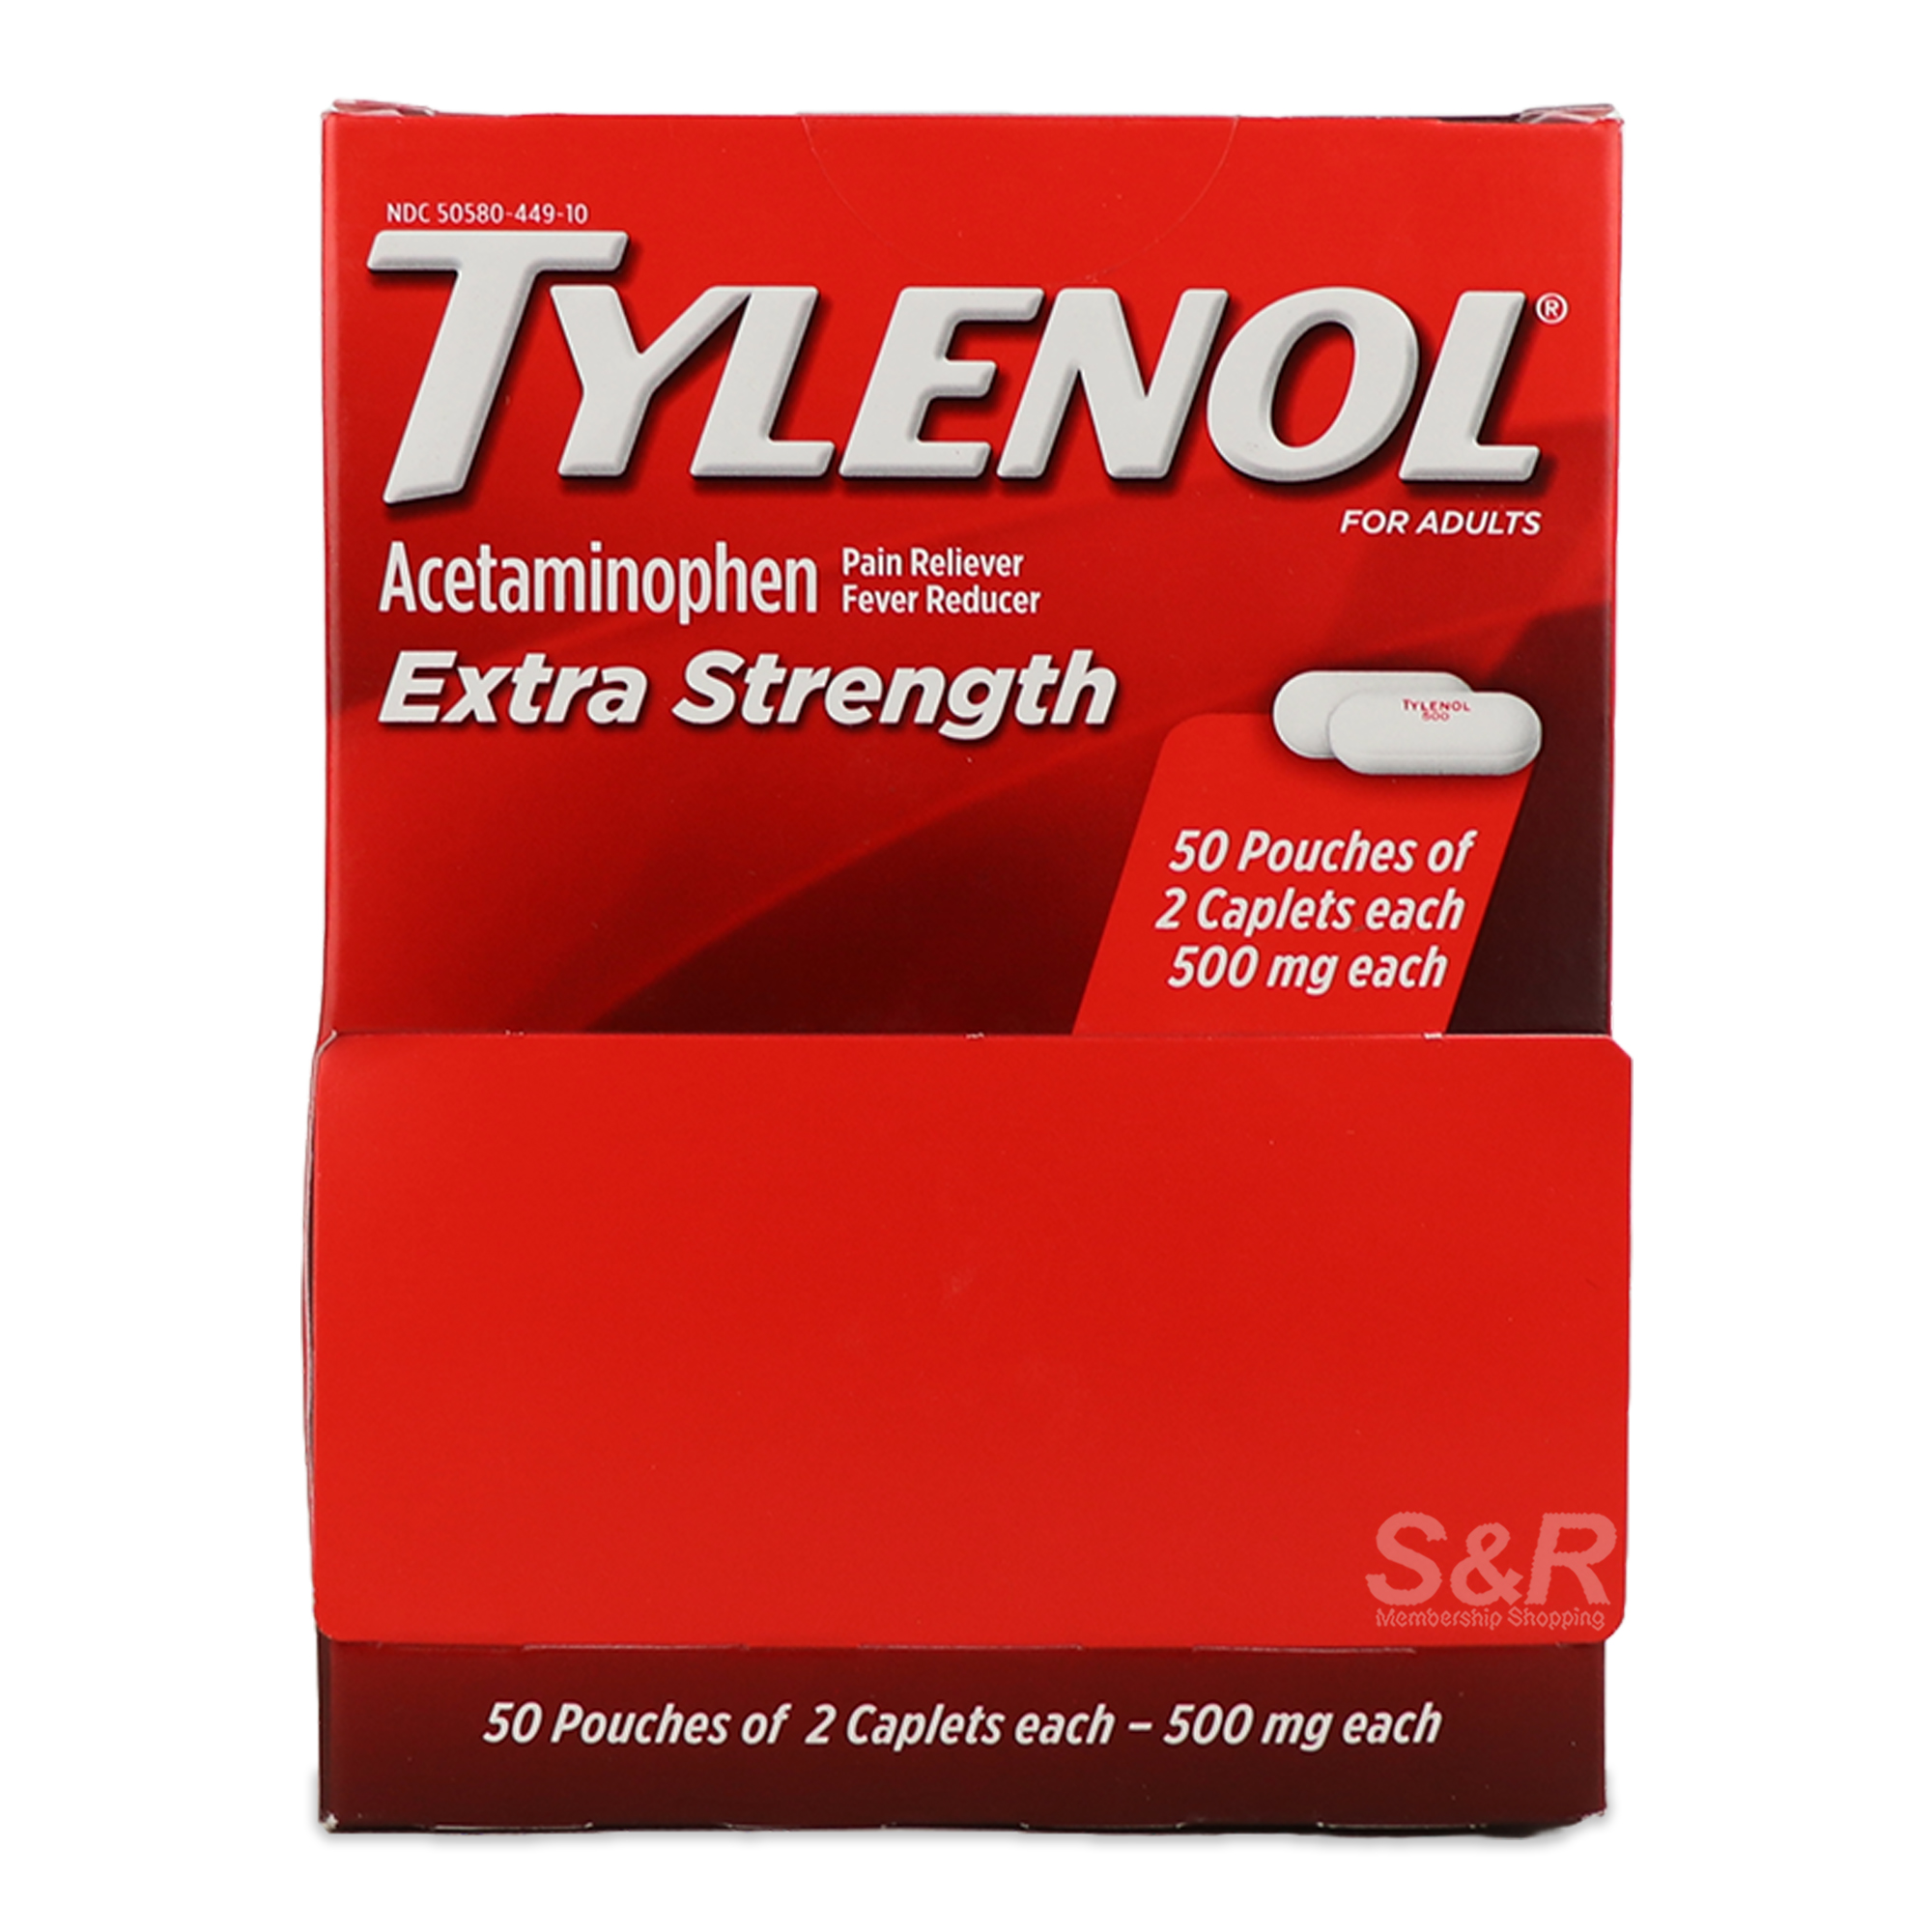 Tylenol Acetaminophen For Adults 50 Pouches x 2 Caplets